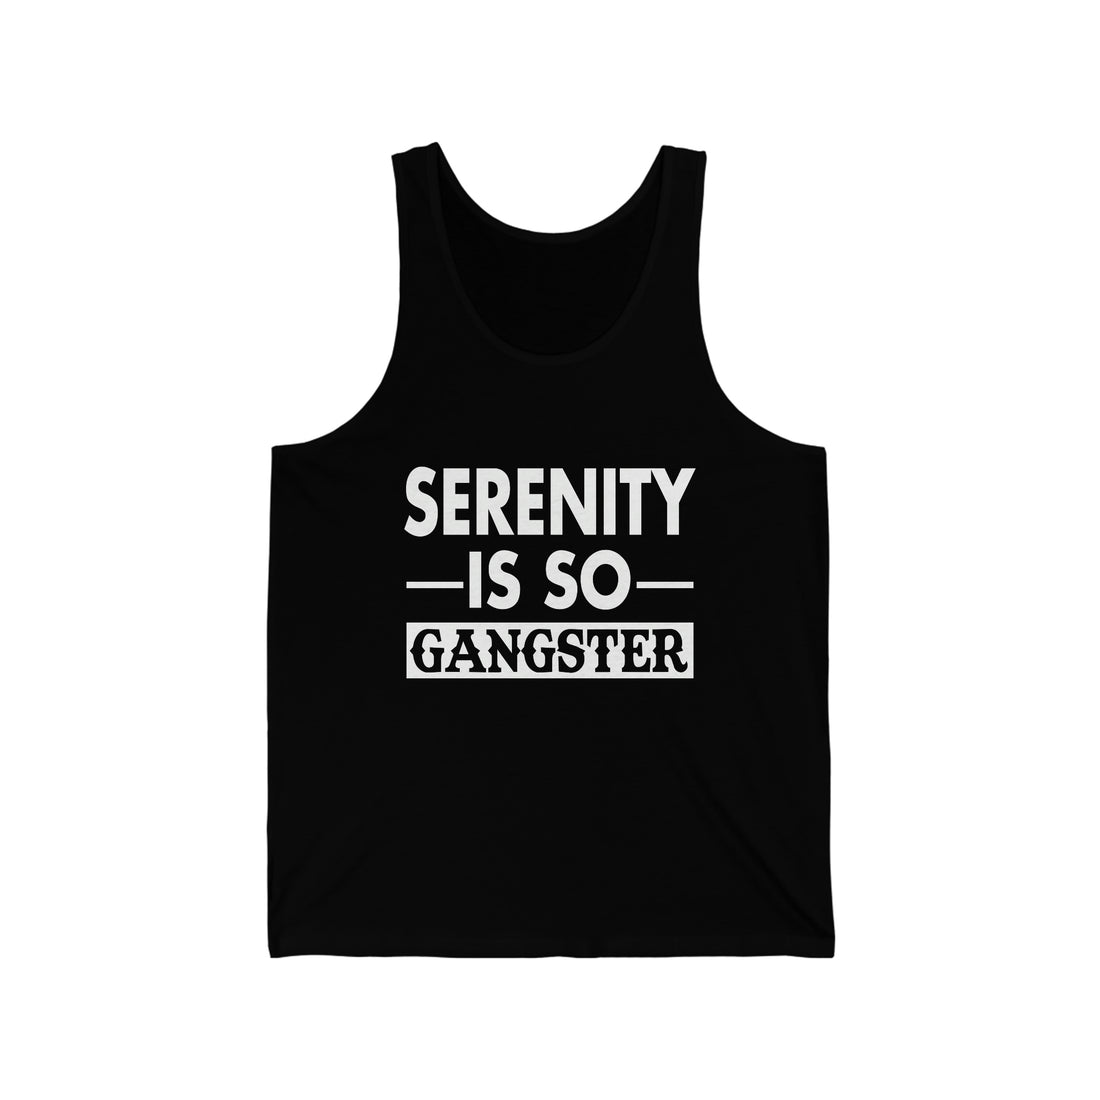 Serenity Is So Gangster - Unisex Jersey Tank Top